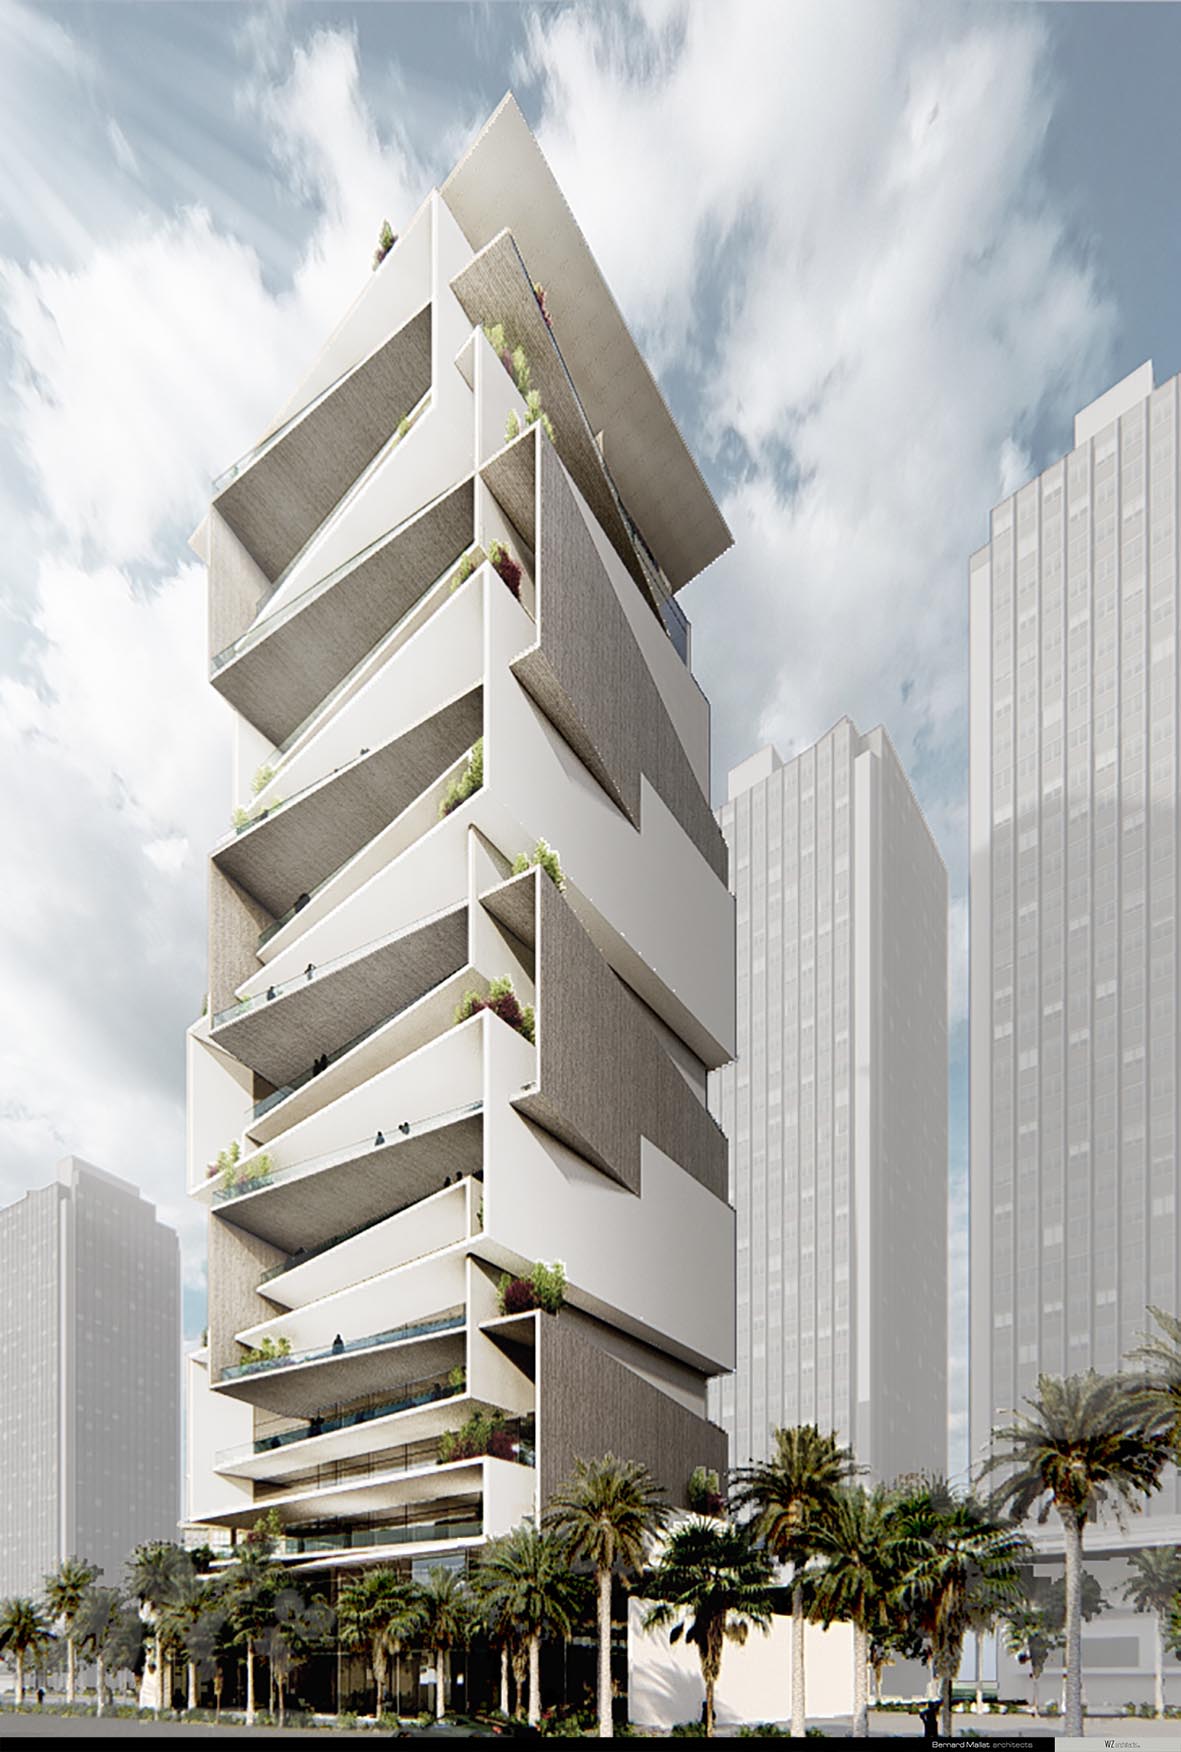 Architecture | ABU DHABI TOWERS 1 | Project Photo